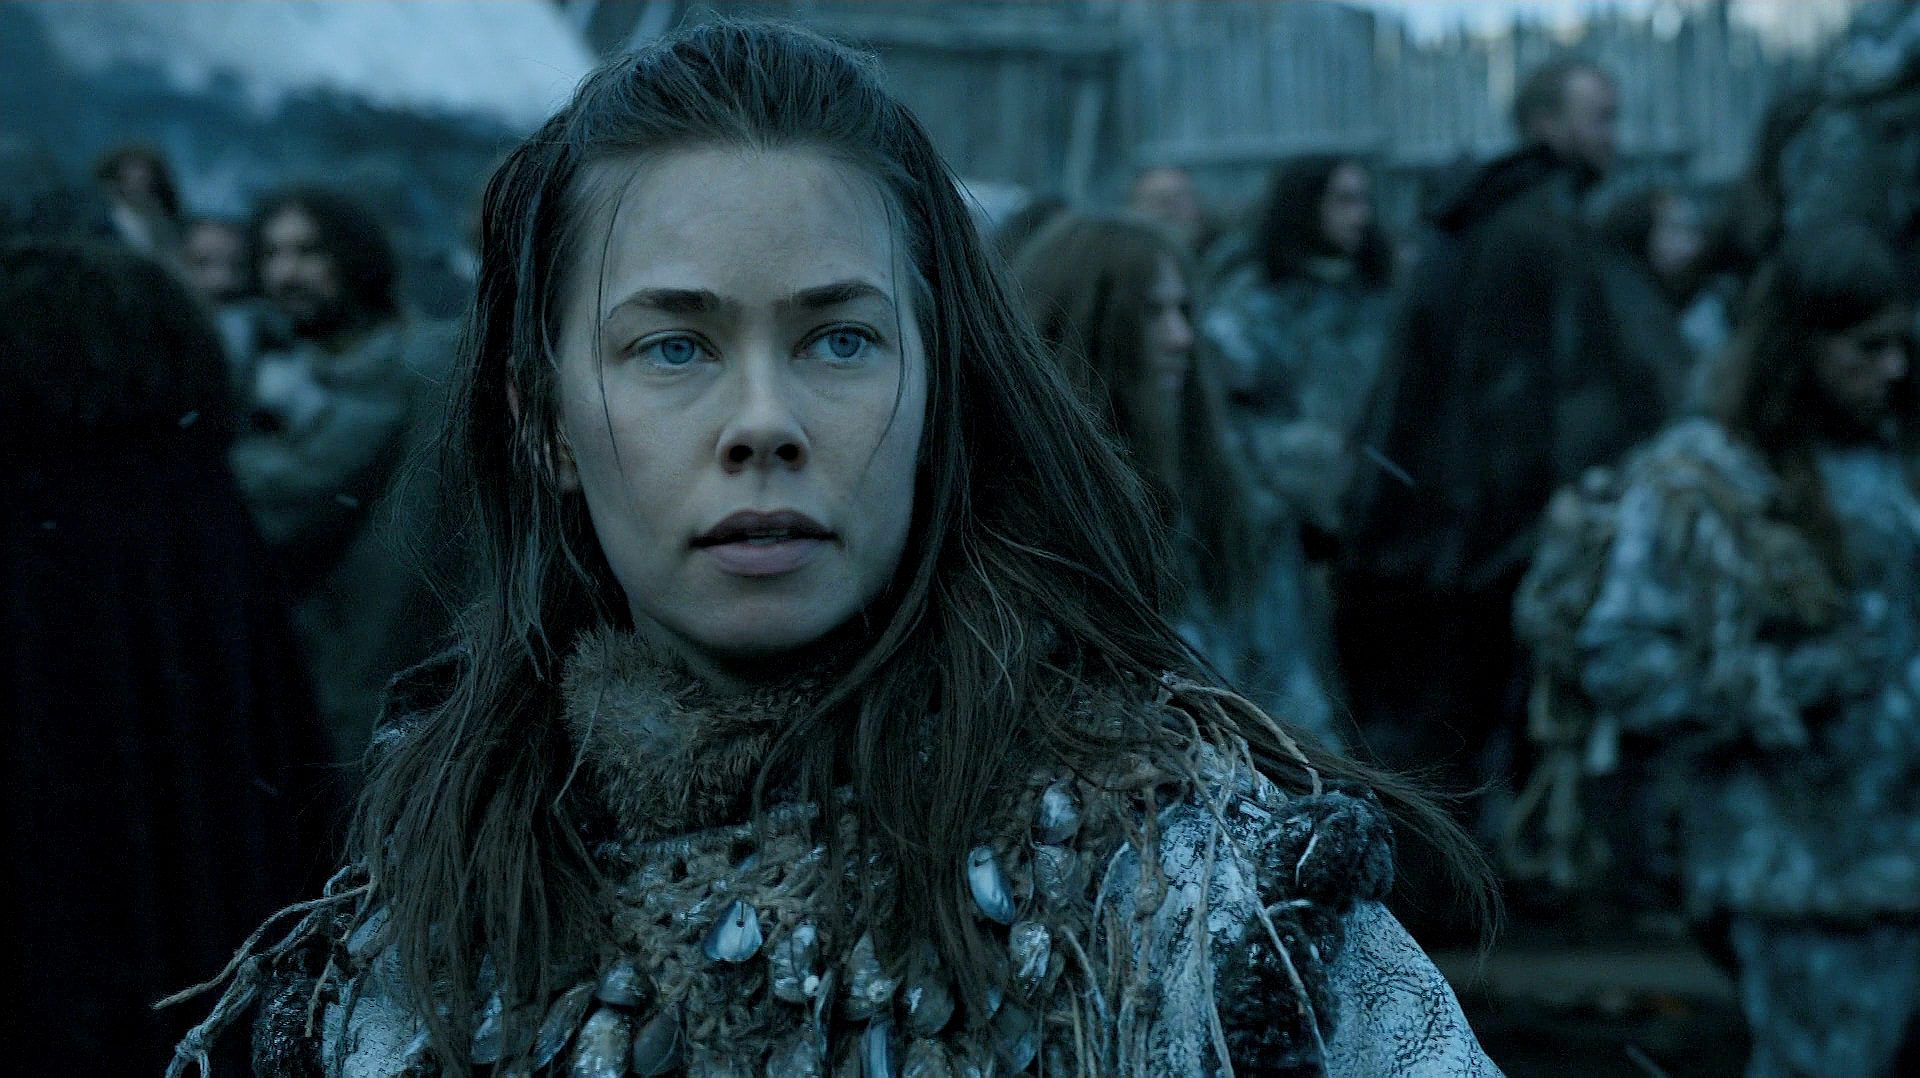 7 minor women characters from Game of Thrones who had major roles to play